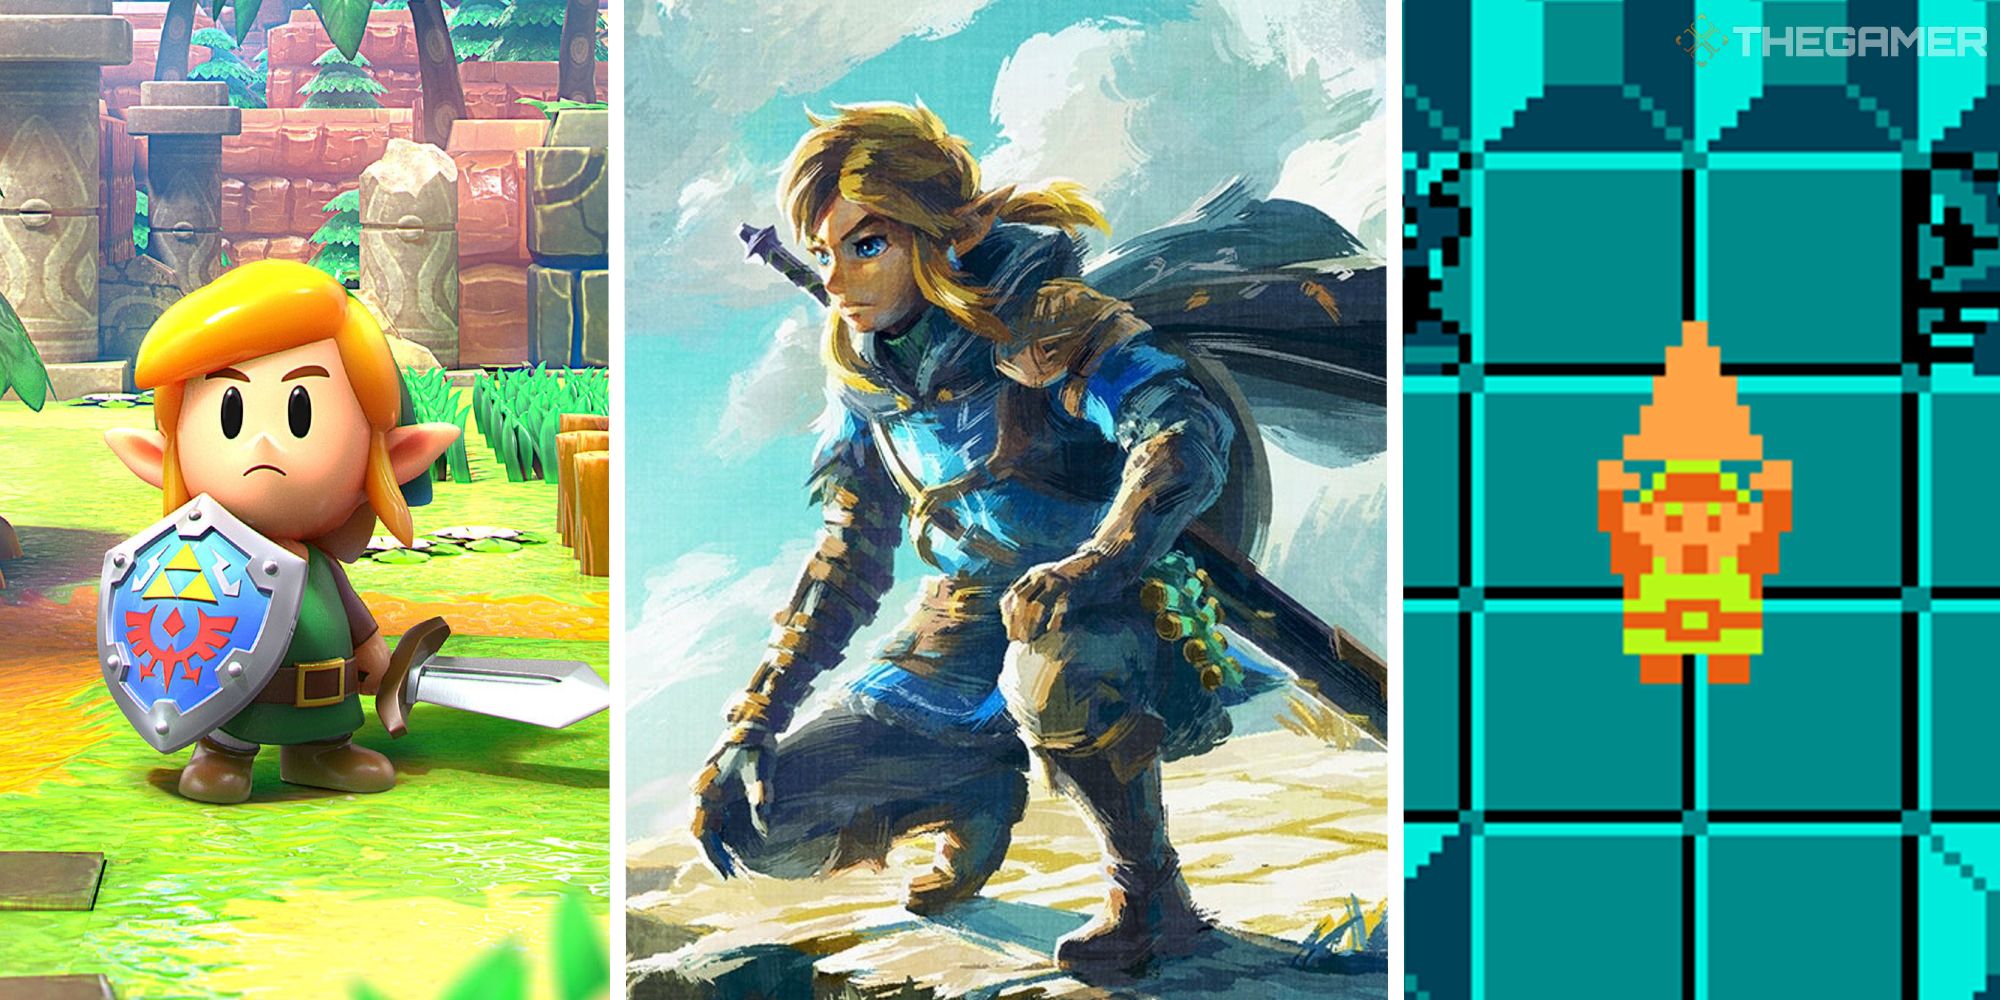 split image showing link from links awakening, tears of the kingdom, and the first zelda game